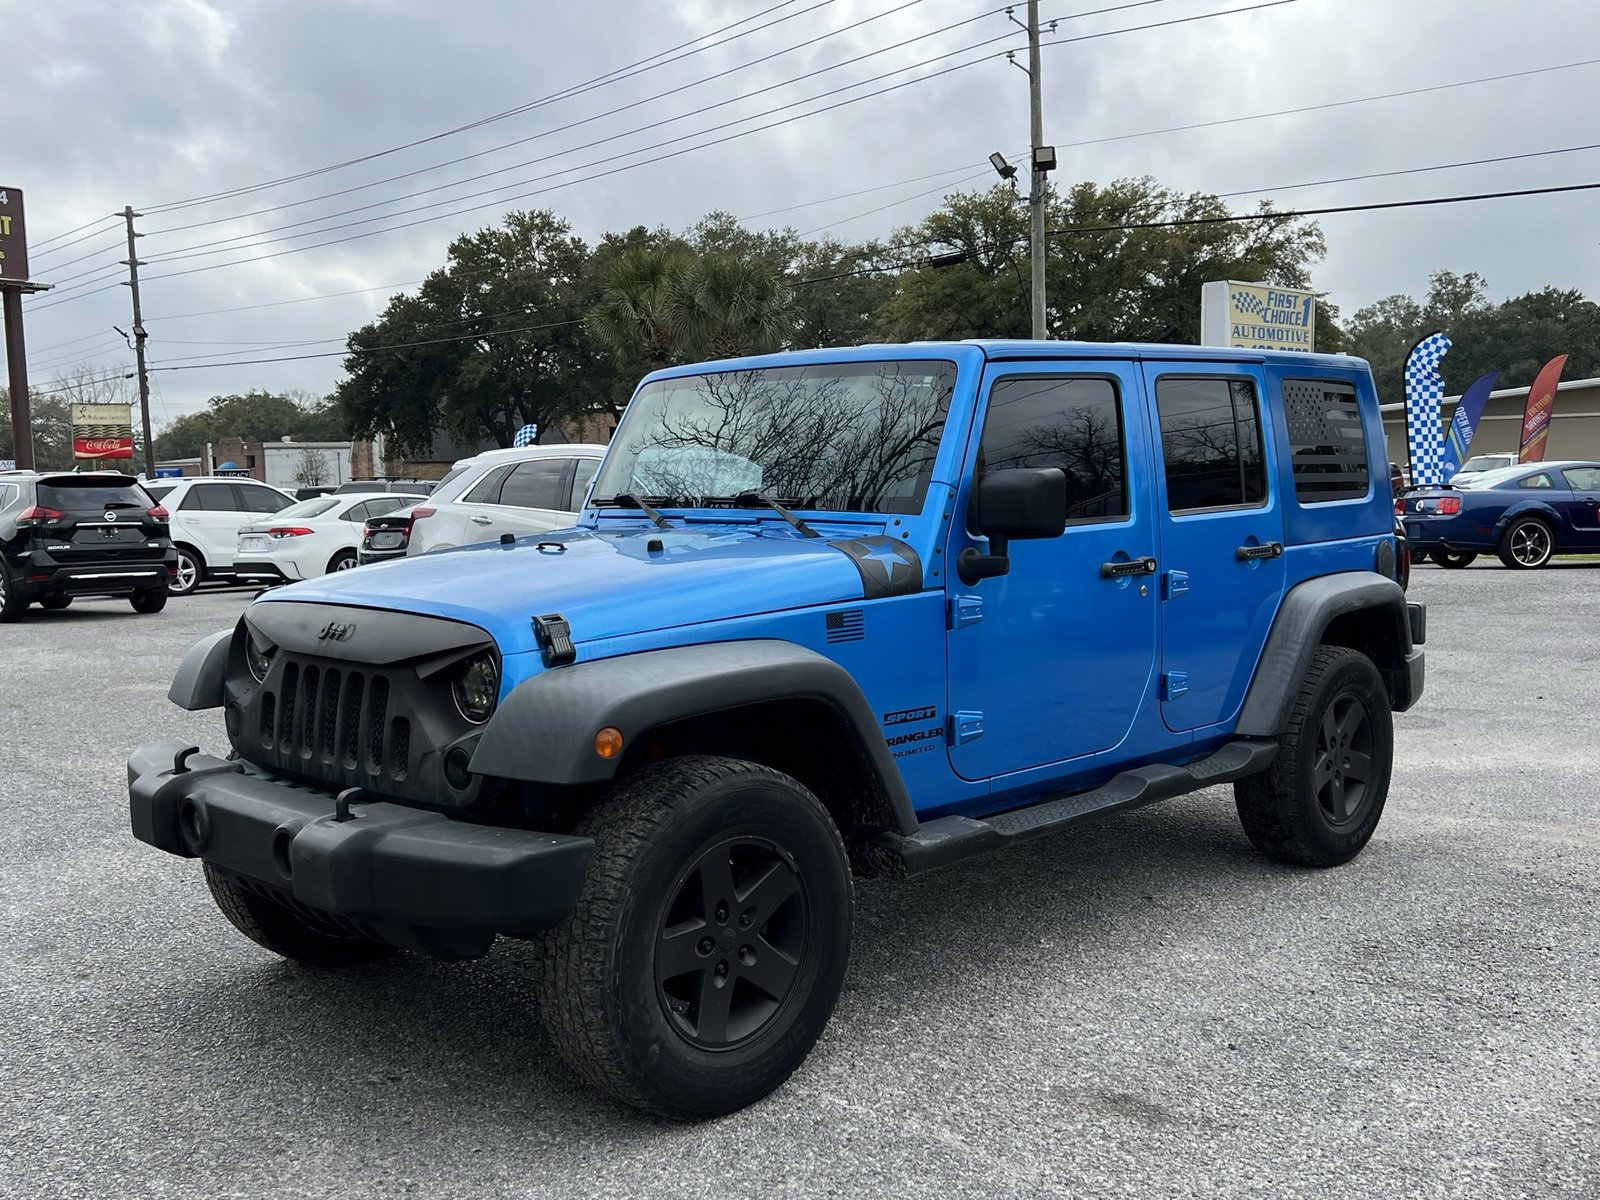 Used 2010 Jeep Wrangler for Sale in Fort Walton Beach, FL (Test Drive at  Home) - Kelley Blue Book